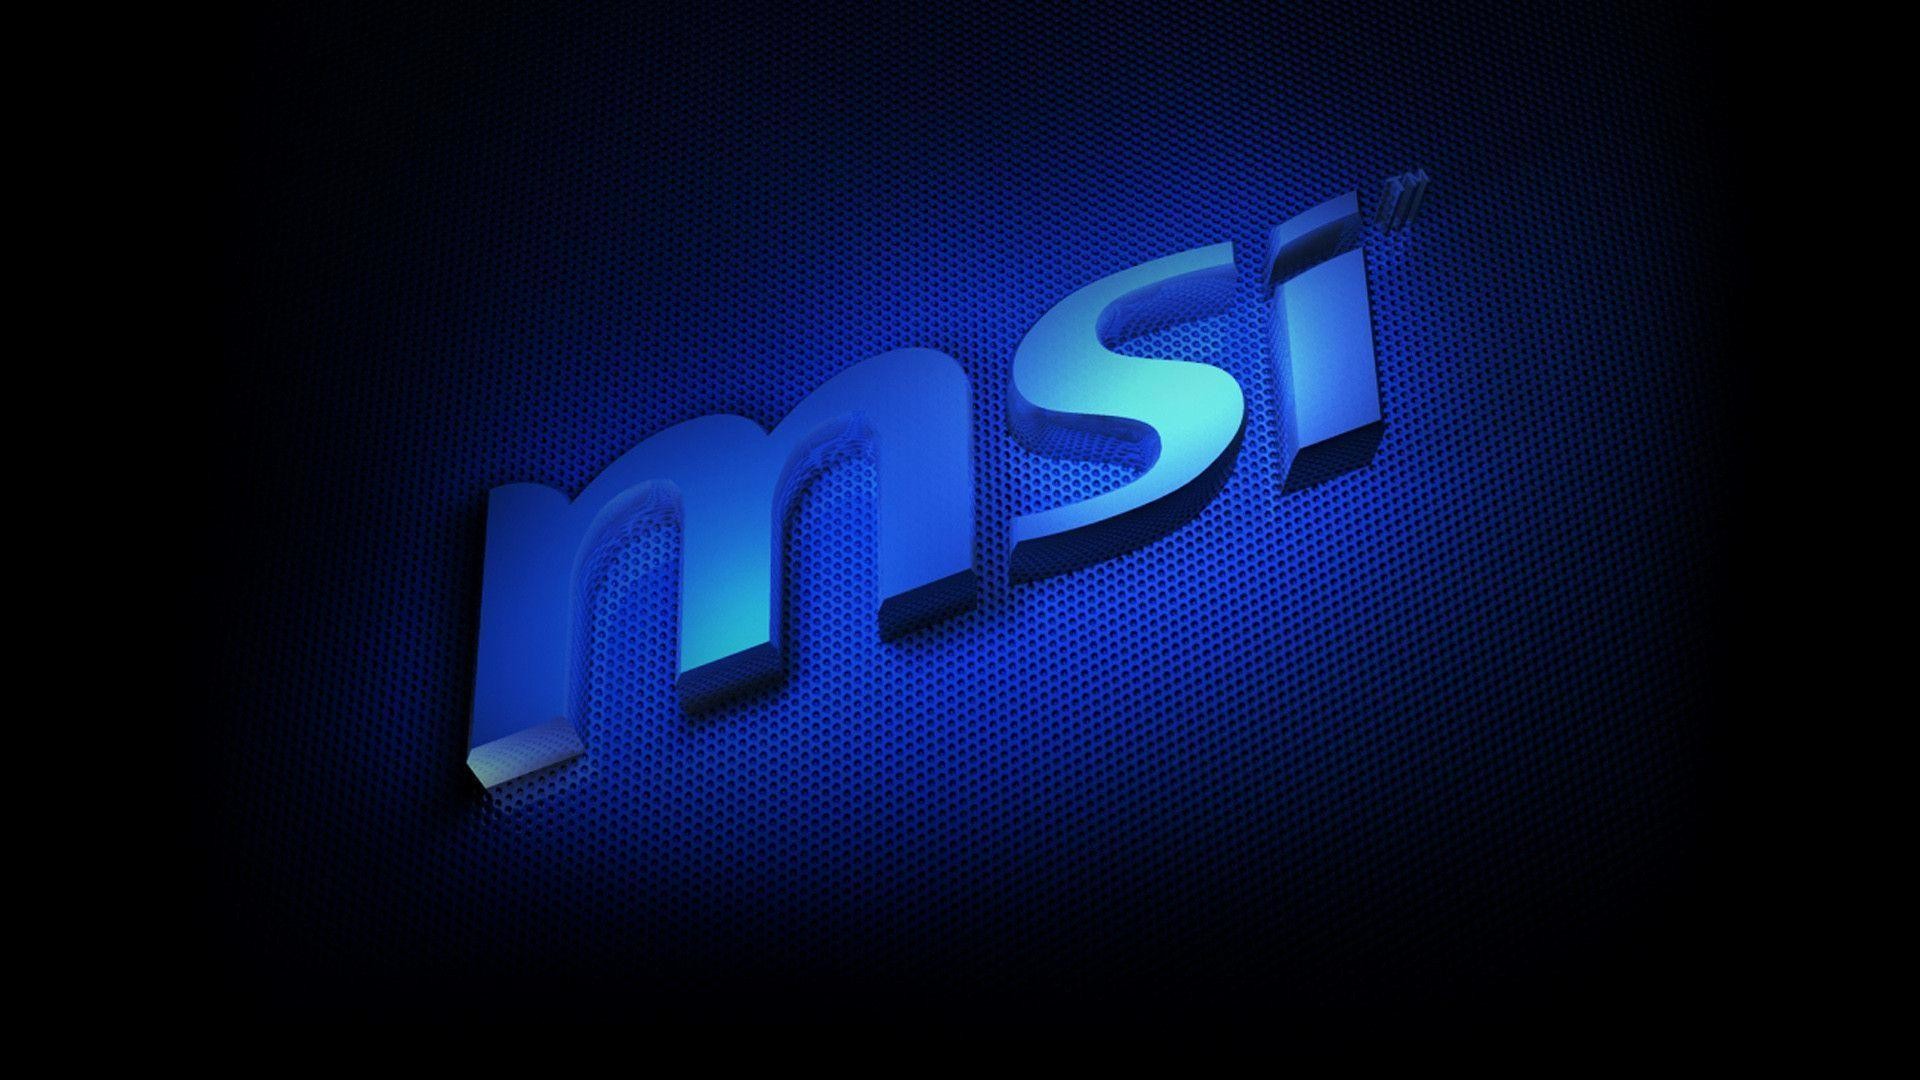 1920x1080 wallpaper.wiki-Msi-Picture-Free-Download-PIC-WPD001683